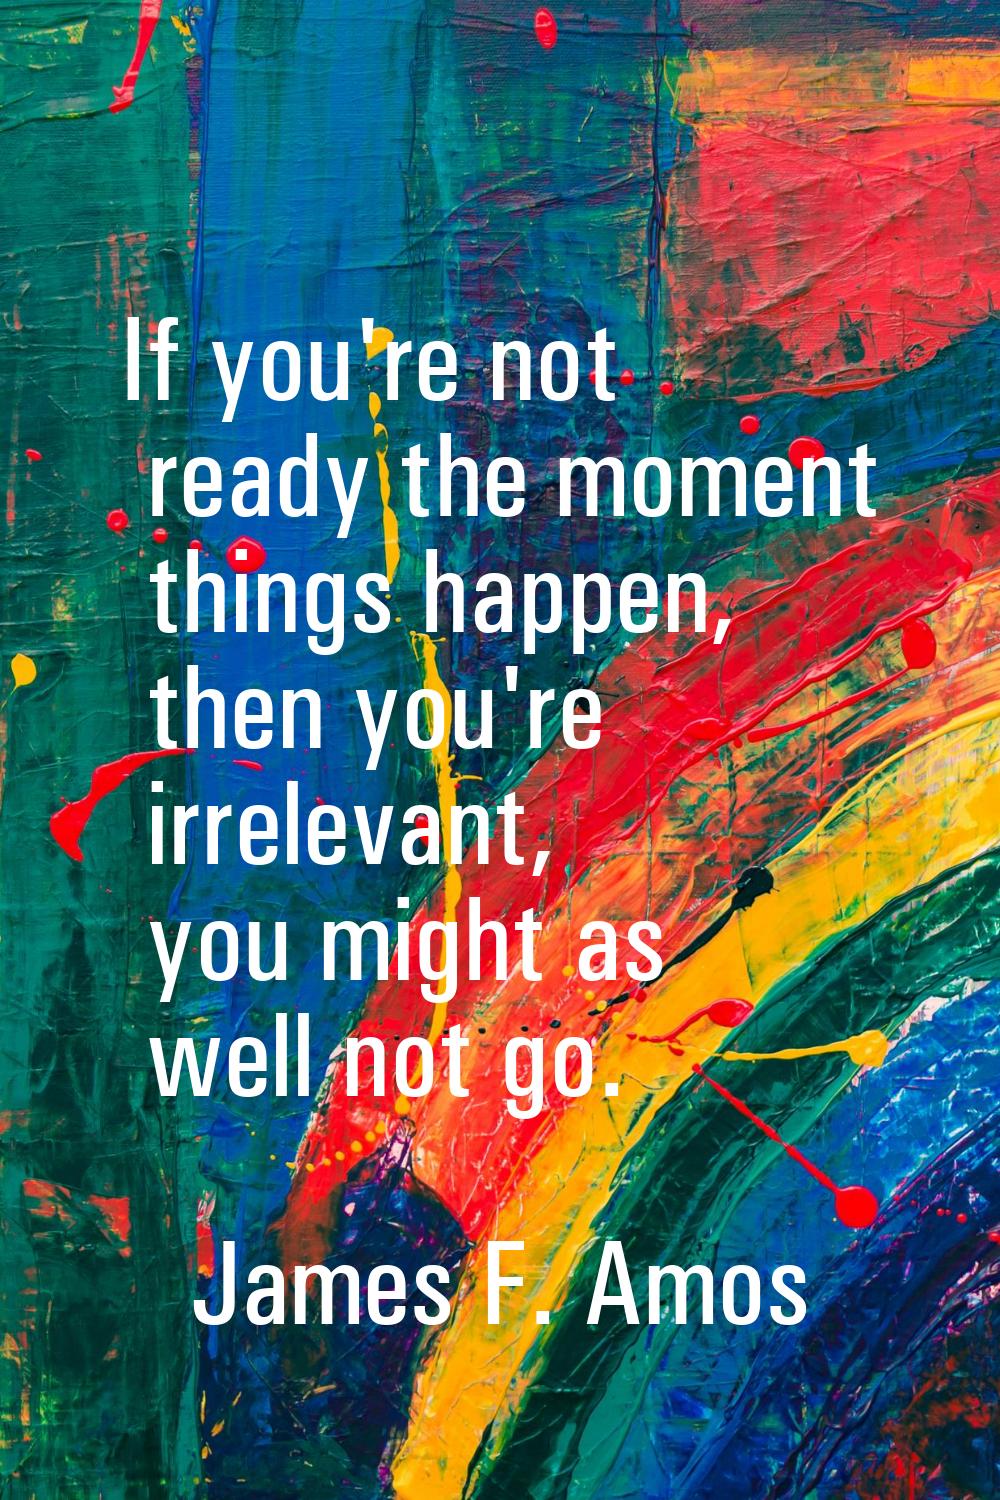 If you're not ready the moment things happen, then you're irrelevant, you might as well not go.